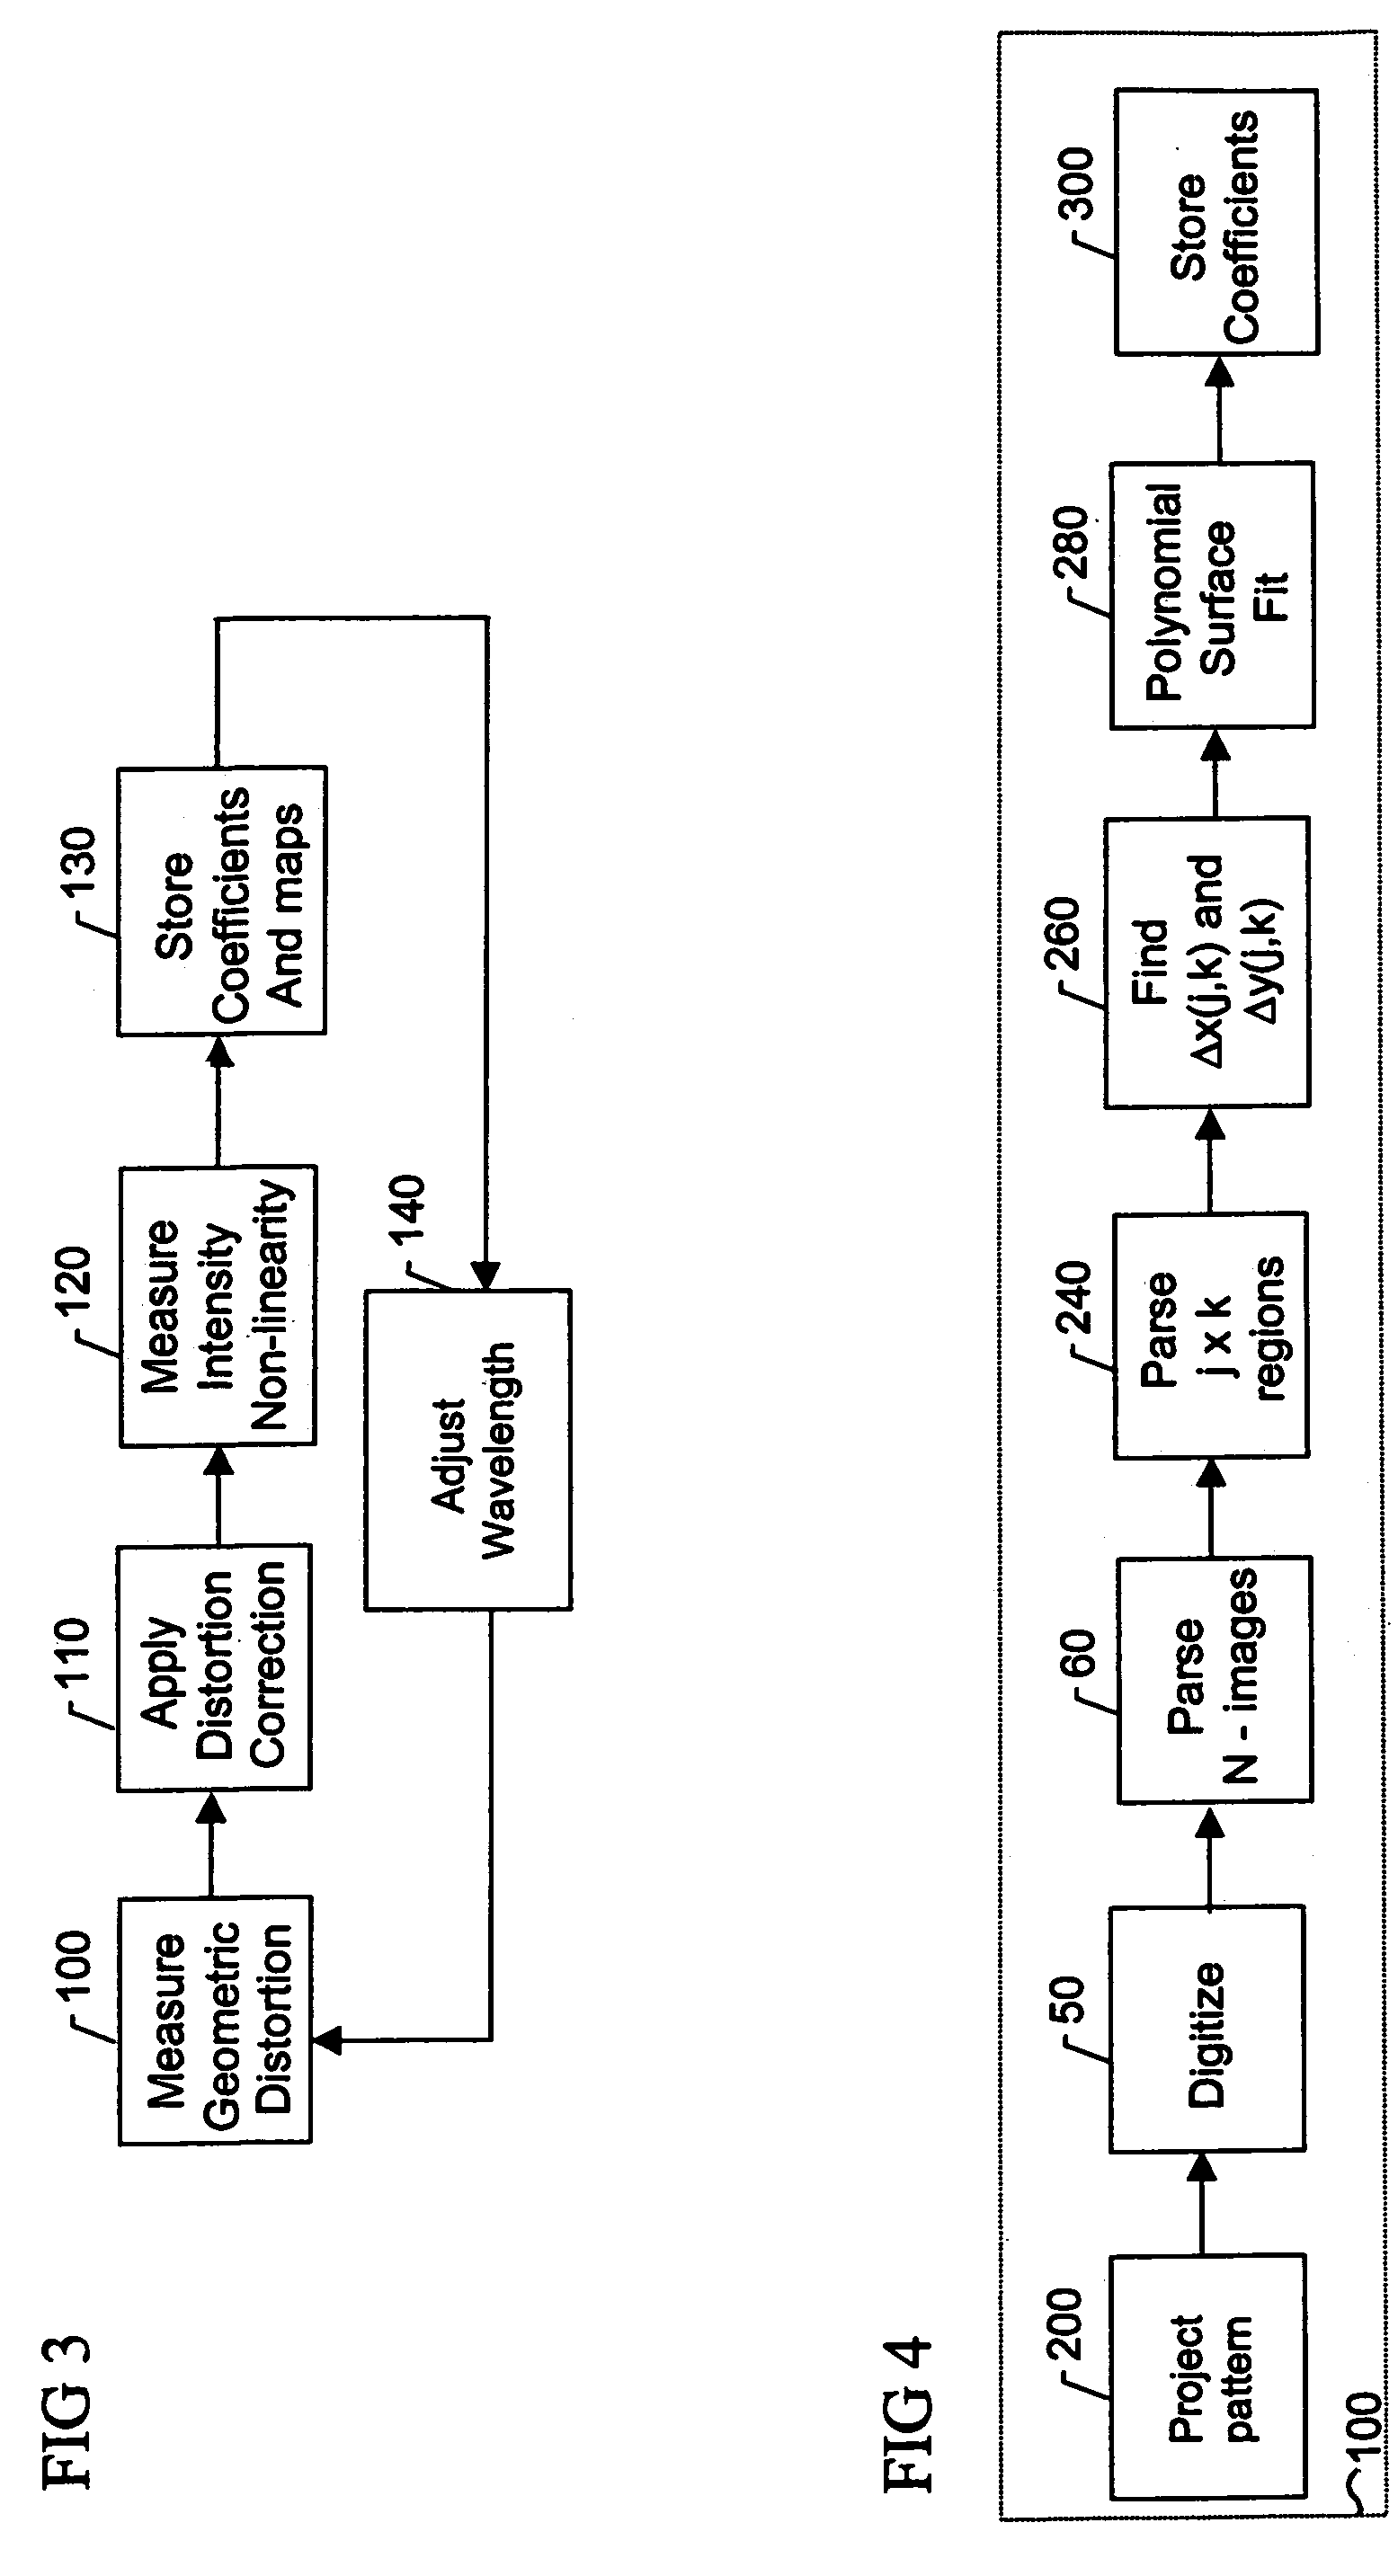 Calibration and error correction in multi-channel imaging